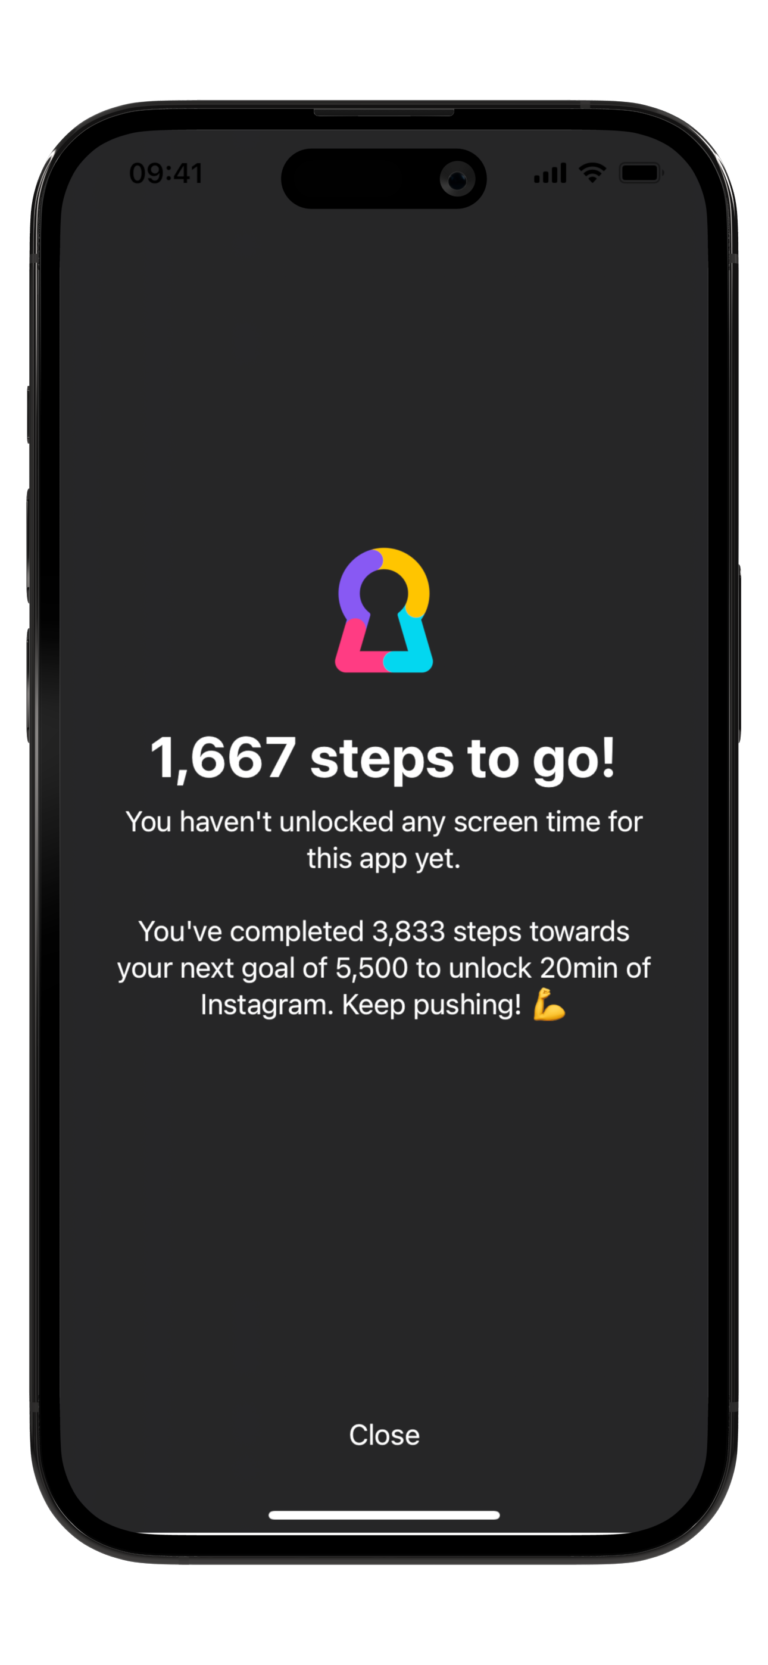 Screenshot of the Fitlock app block screen when blocking instagram with a step count health goal.